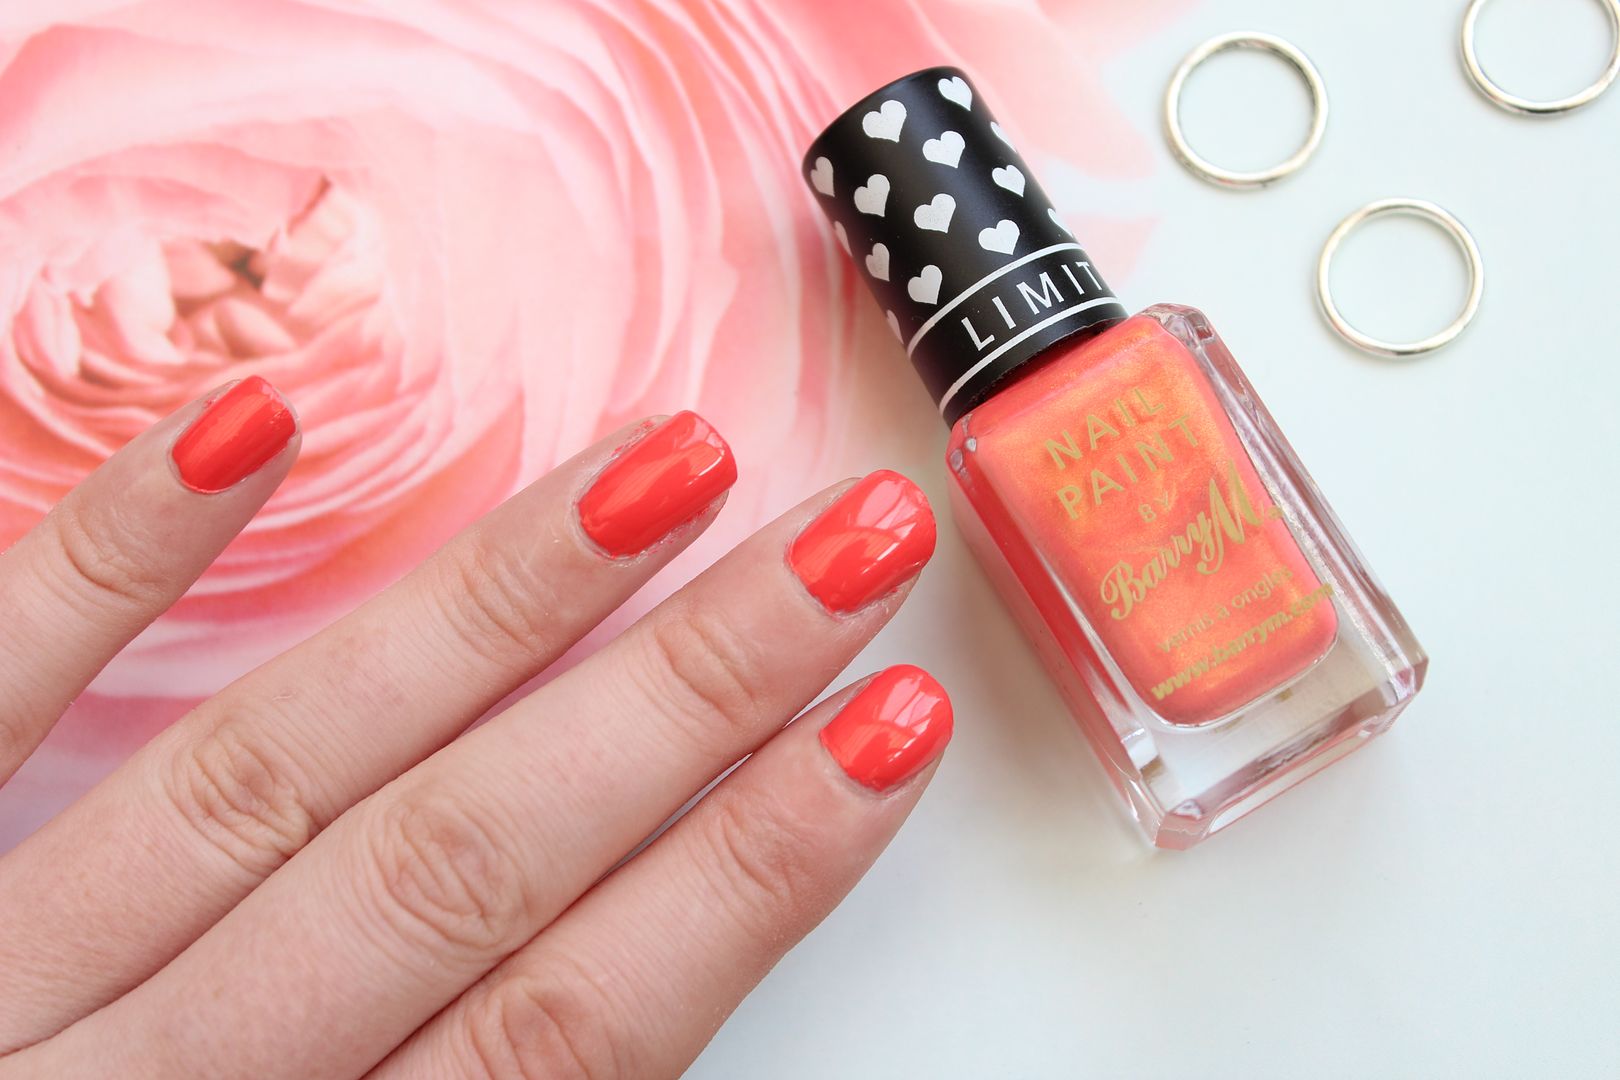 Barry M Limited Edition Nail Paint in Carousel